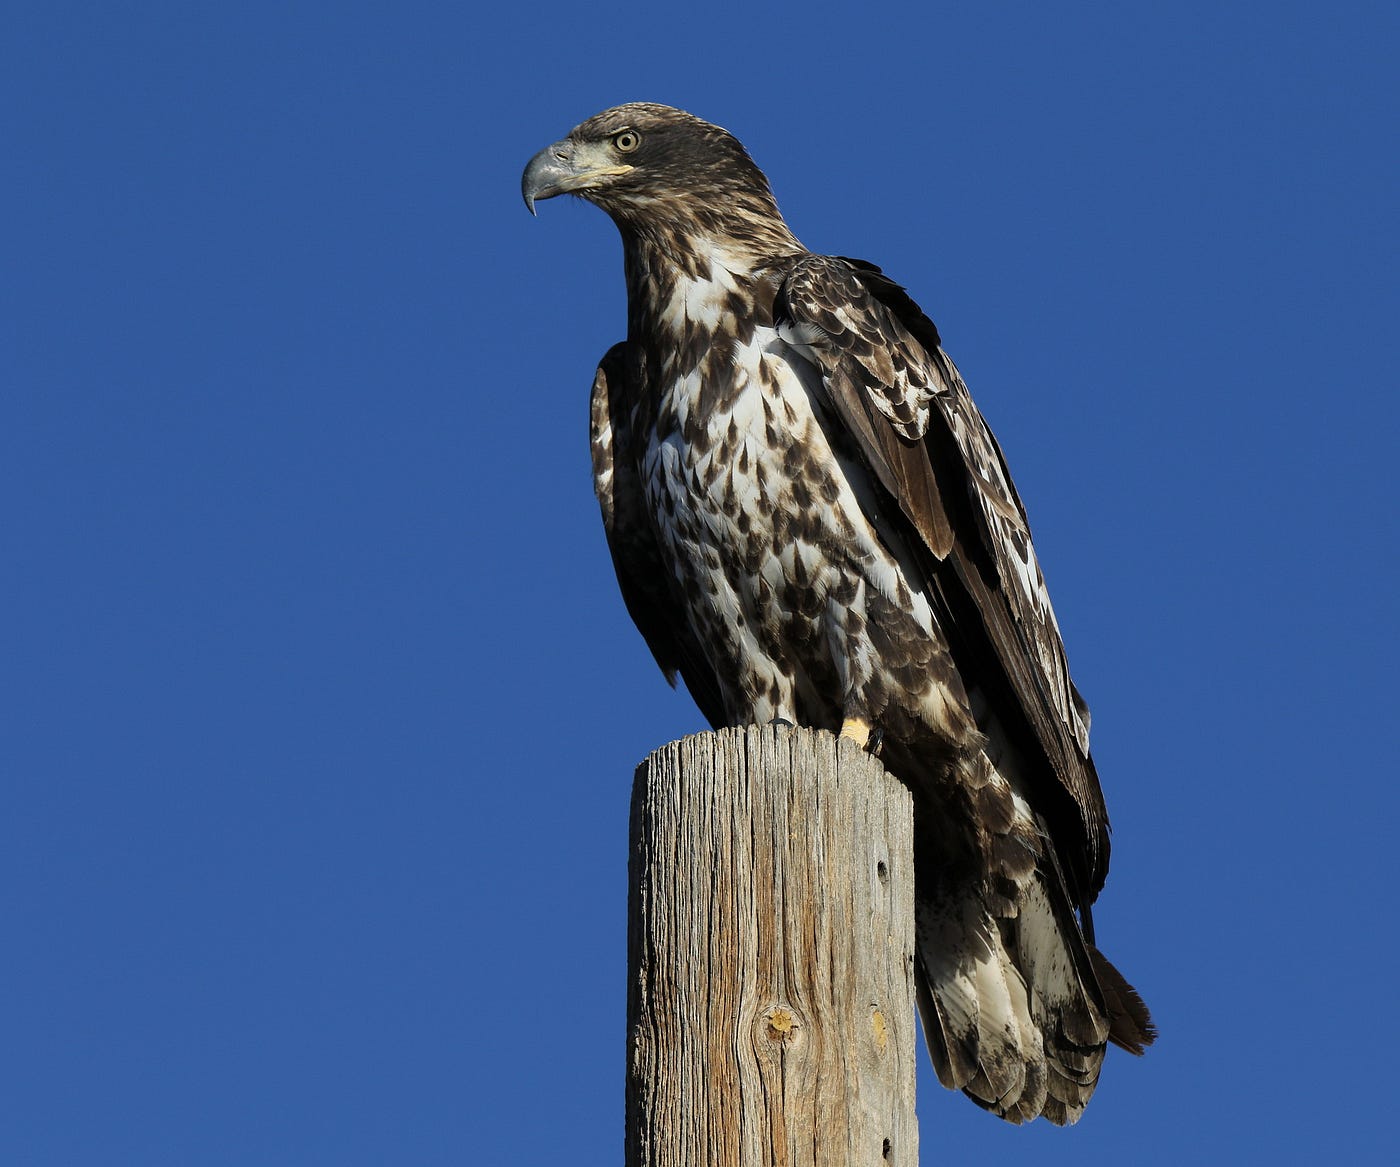 immature bald eagle with white splotchy feathers perched on a utility pole